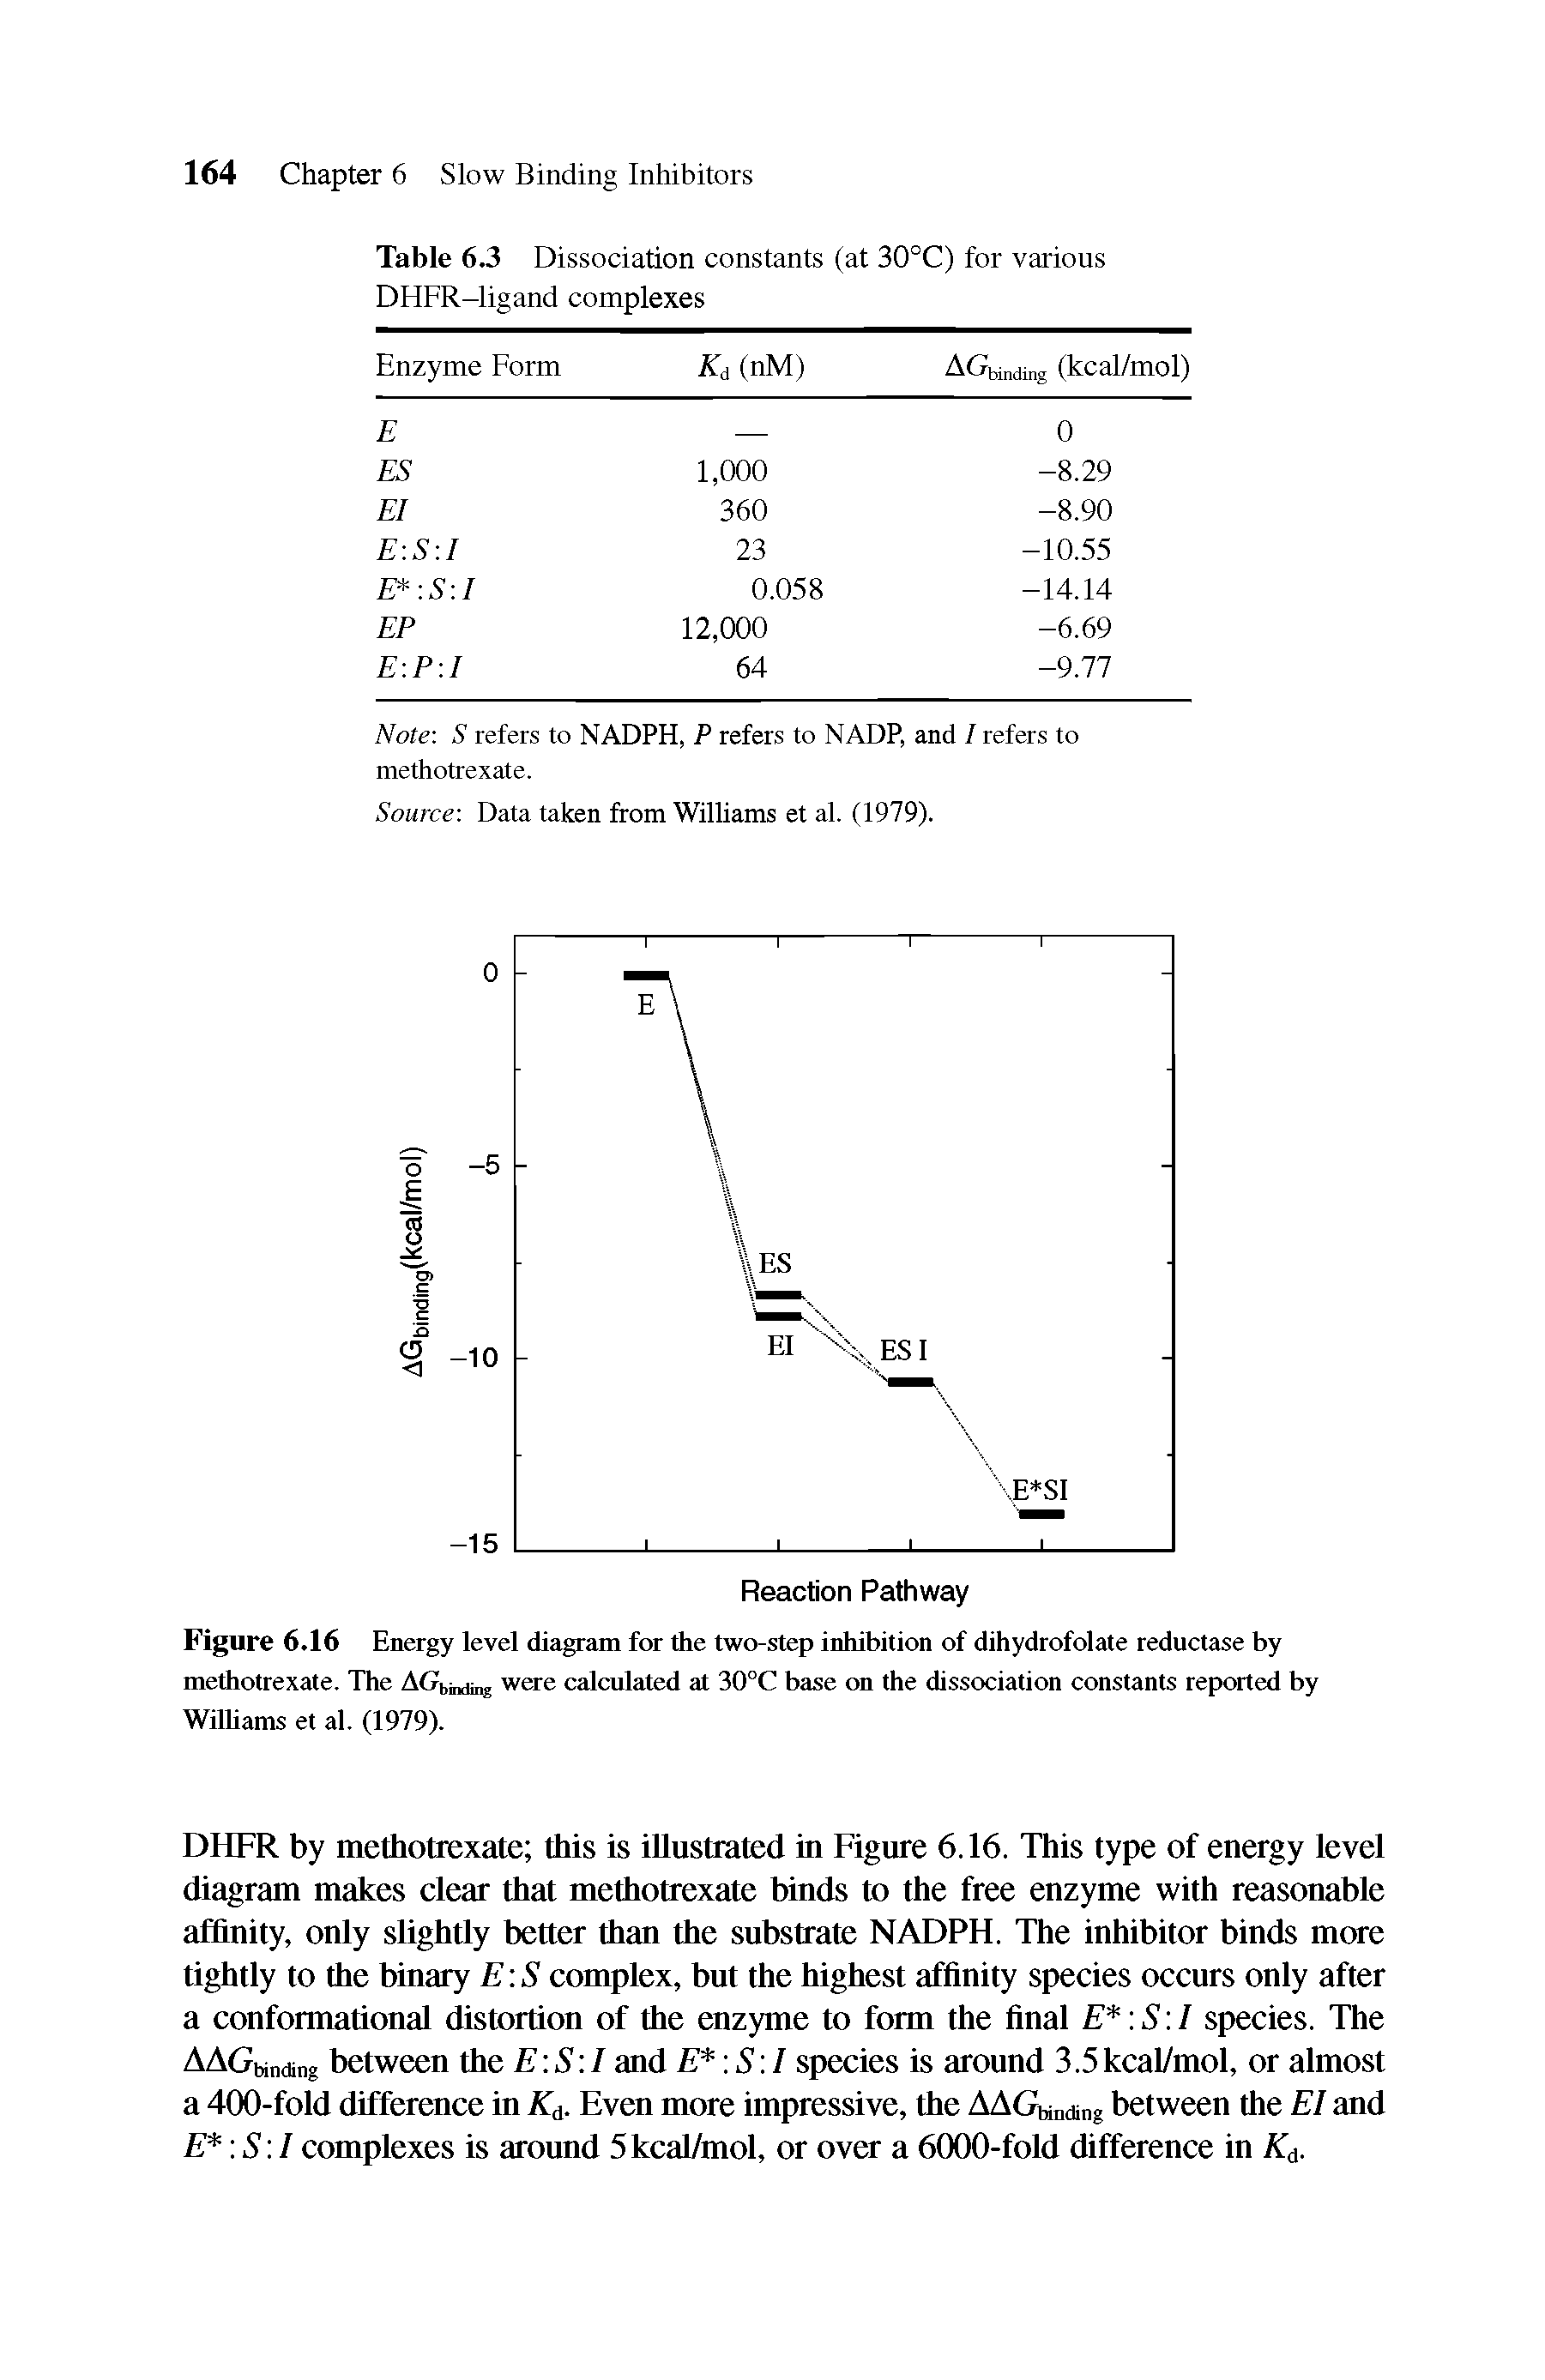 Figure 6.16 Energy level diagram for the two-step inhibition of dihydrofolate reductase by methotrexate. The AGbinding were calculated at 30°C base on the dissociation constants reported by Williams et al. (1979).